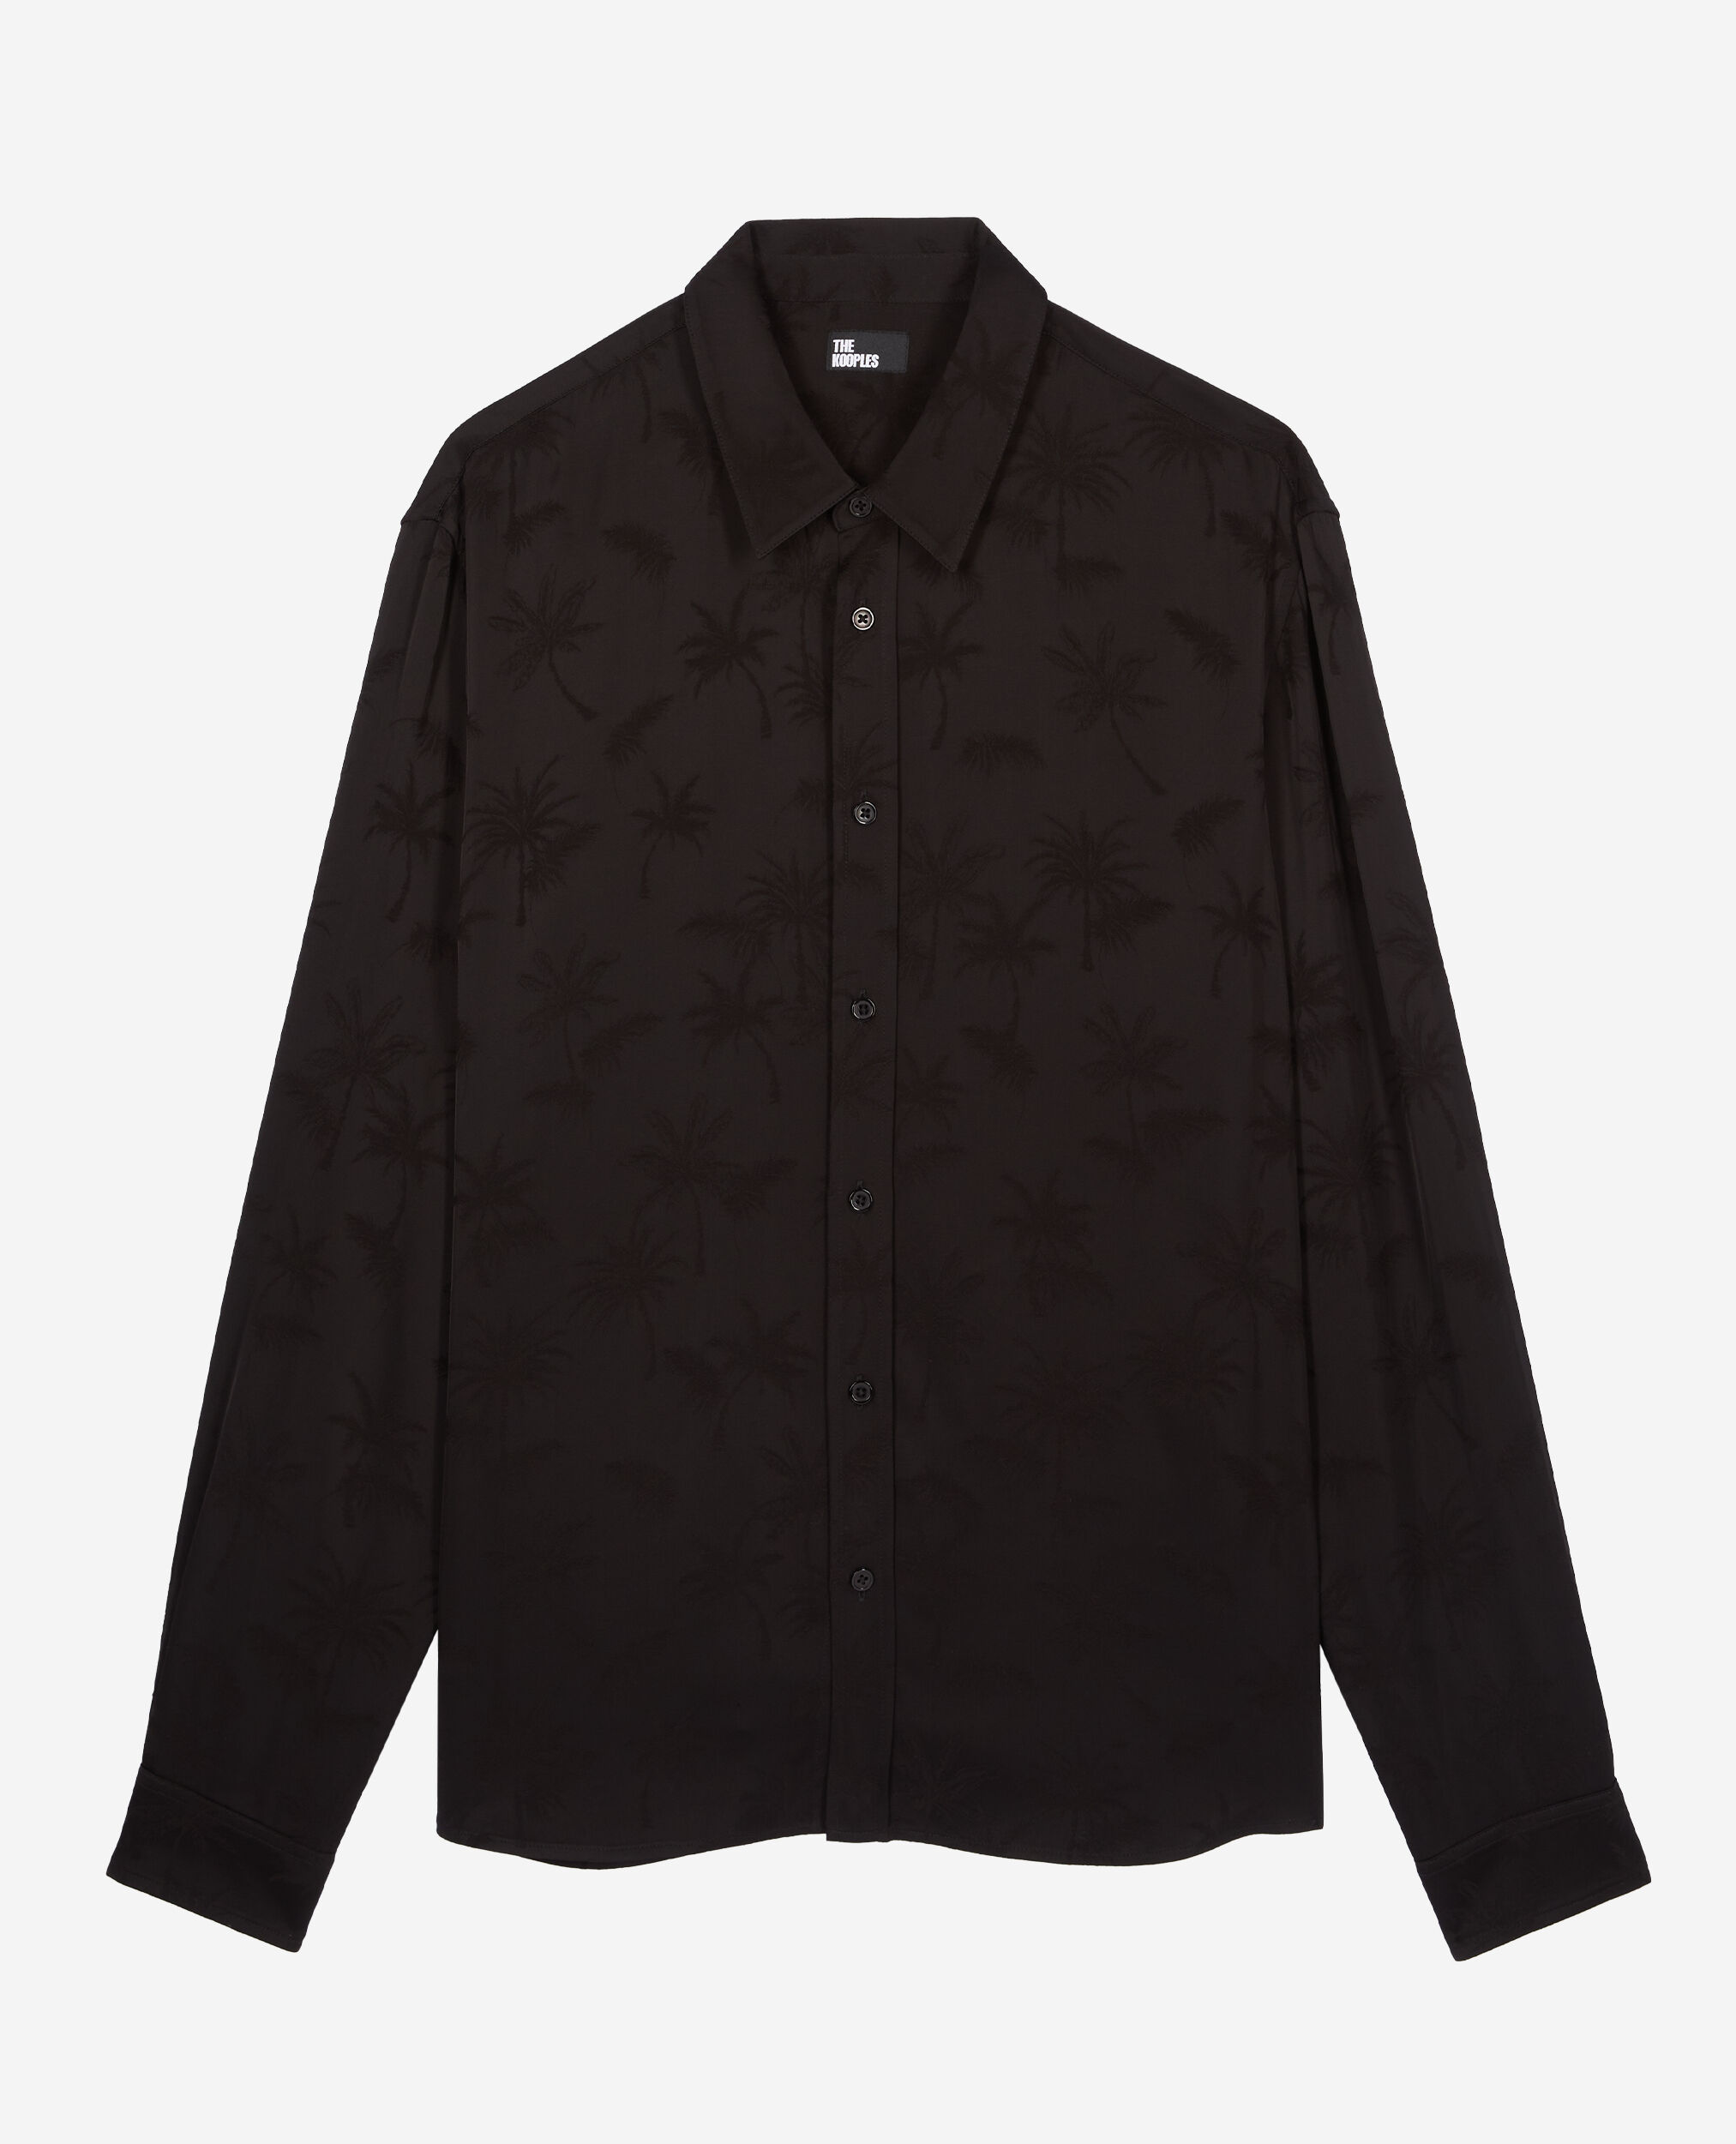 Black jacquard shirt with palm trees, BLACK, hi-res image number null